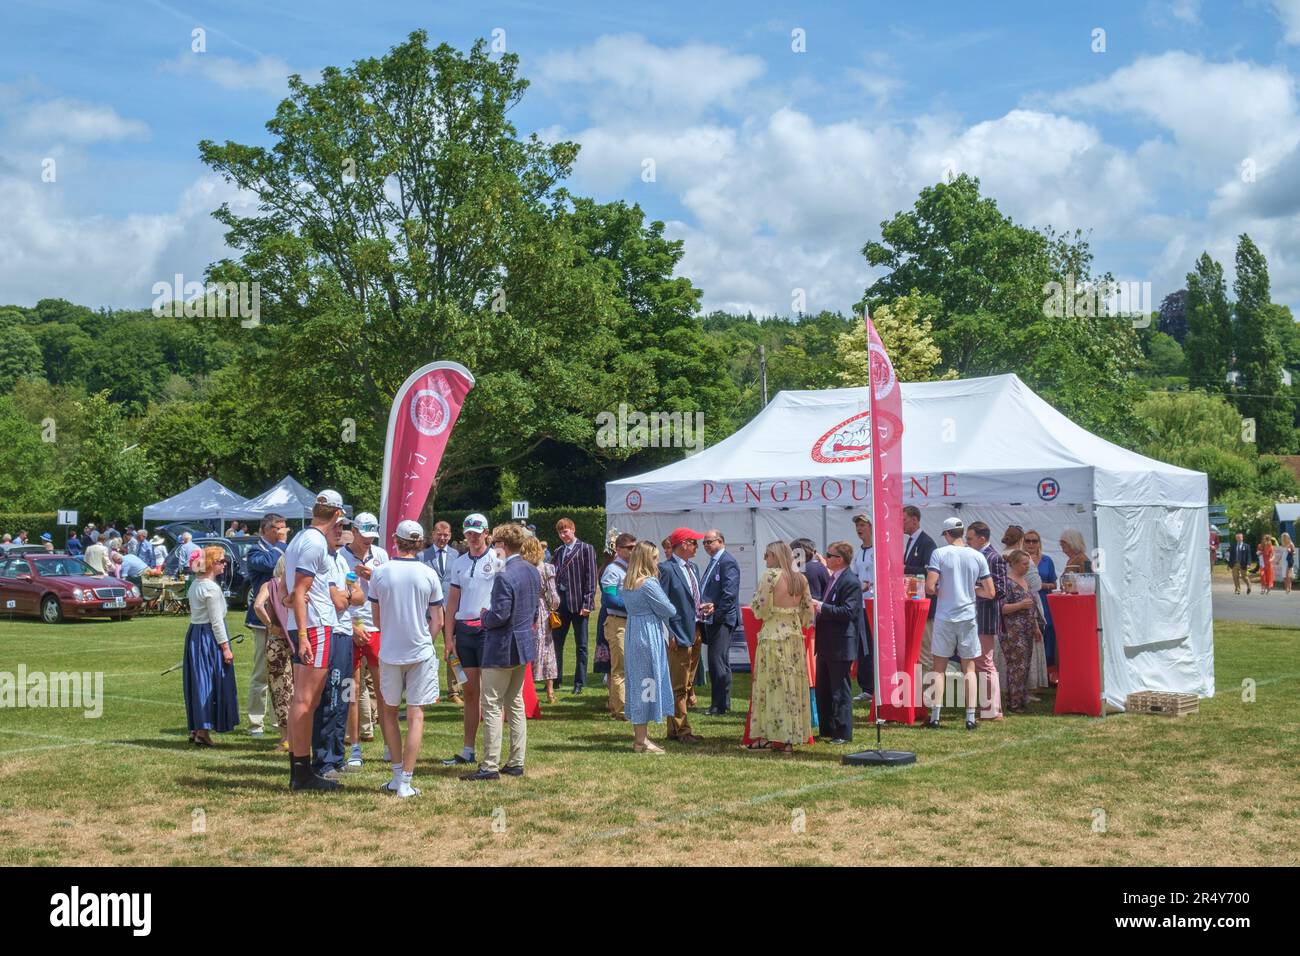 A reception for Pangbourne College at the Henley Royal Regatta, Henley-on-Thames, 2022 Stock Photo